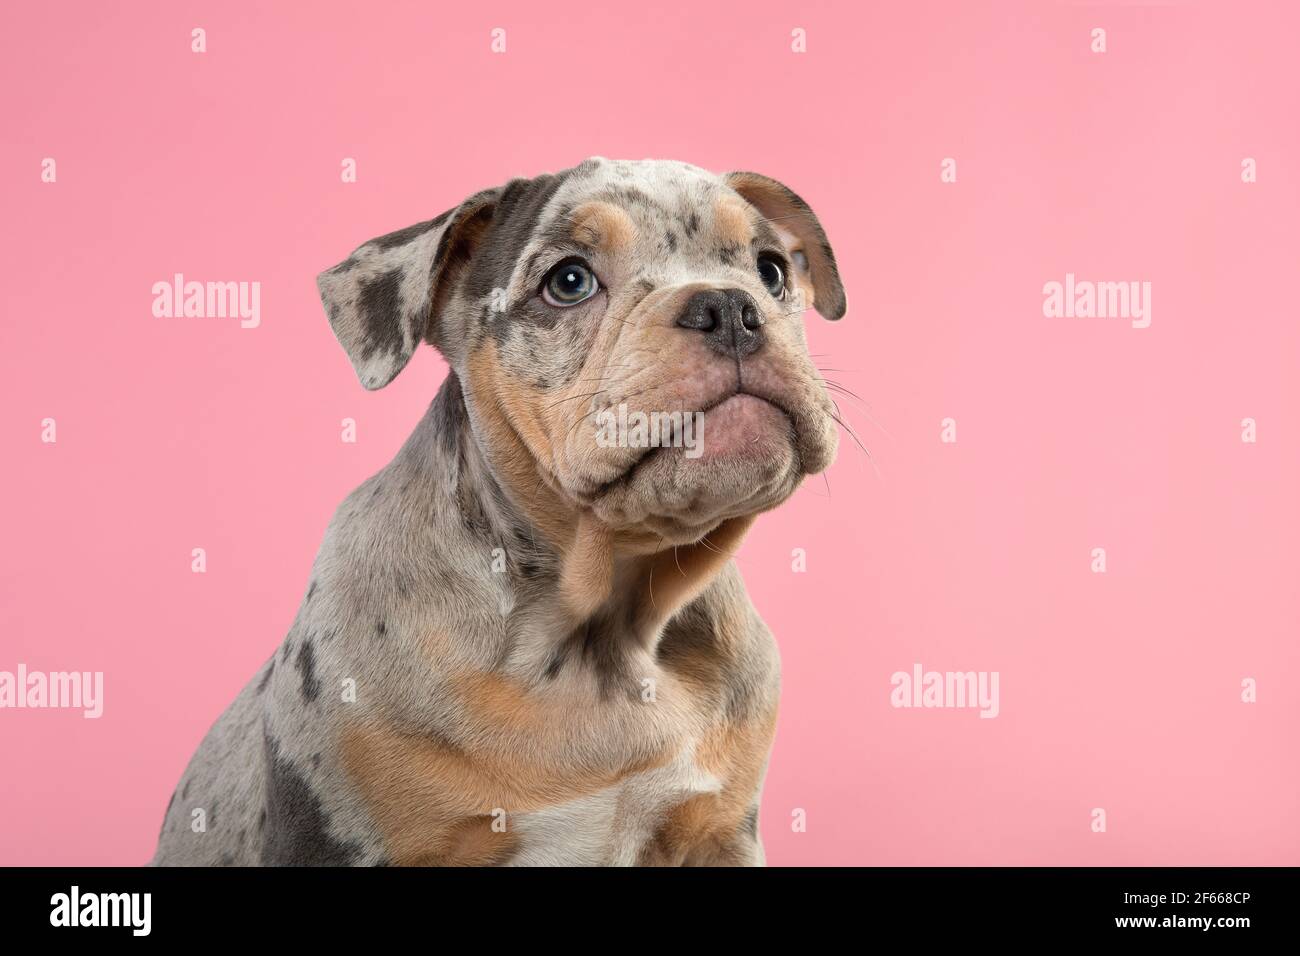 Portrait of a cute old english bulldog puppy looking up on a pink background Stock Photo